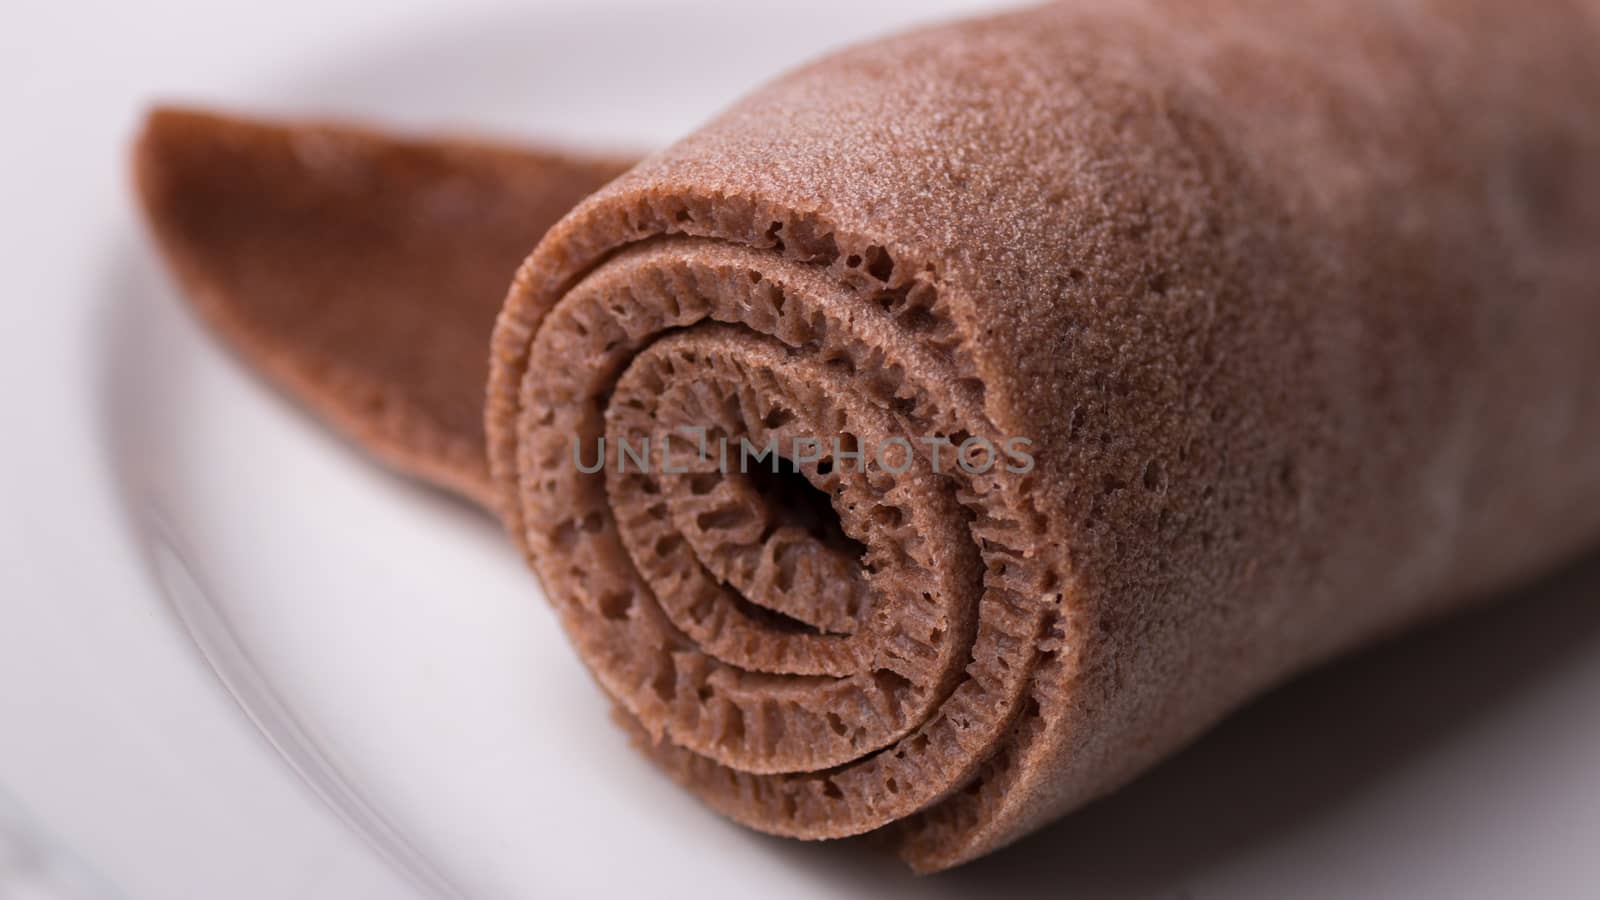 A Roll of Injera made from black teff on a white plate